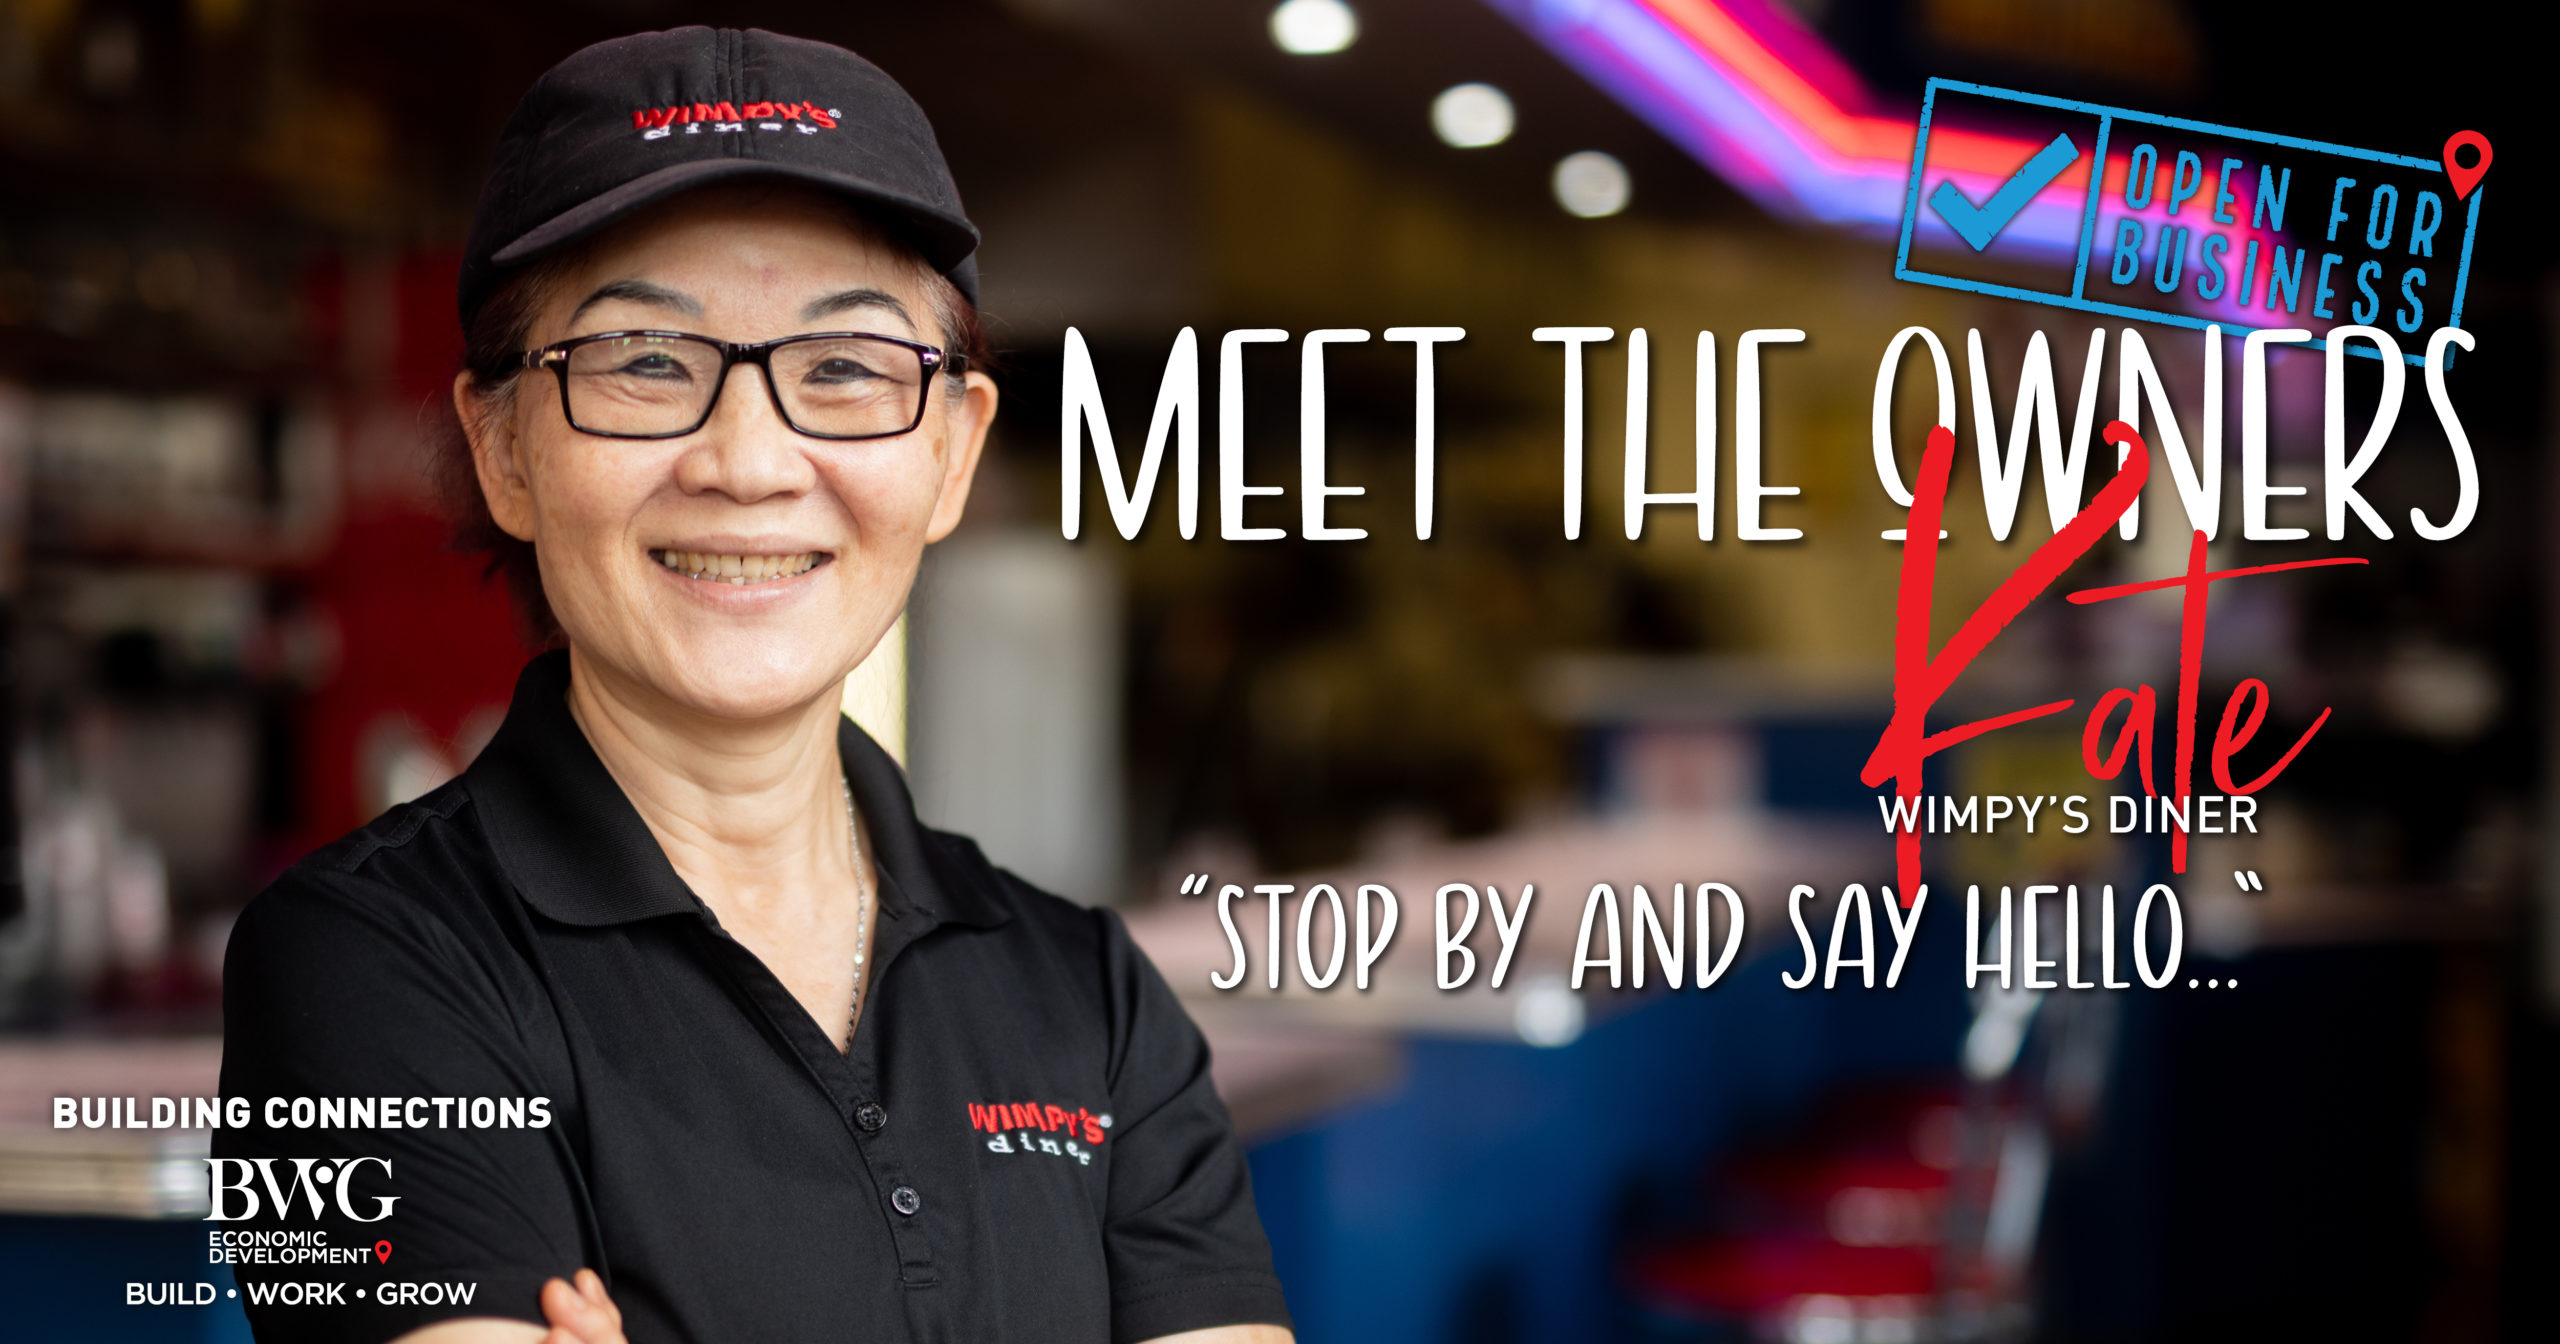 Kate Yip, owner of Wimpy's Diner.